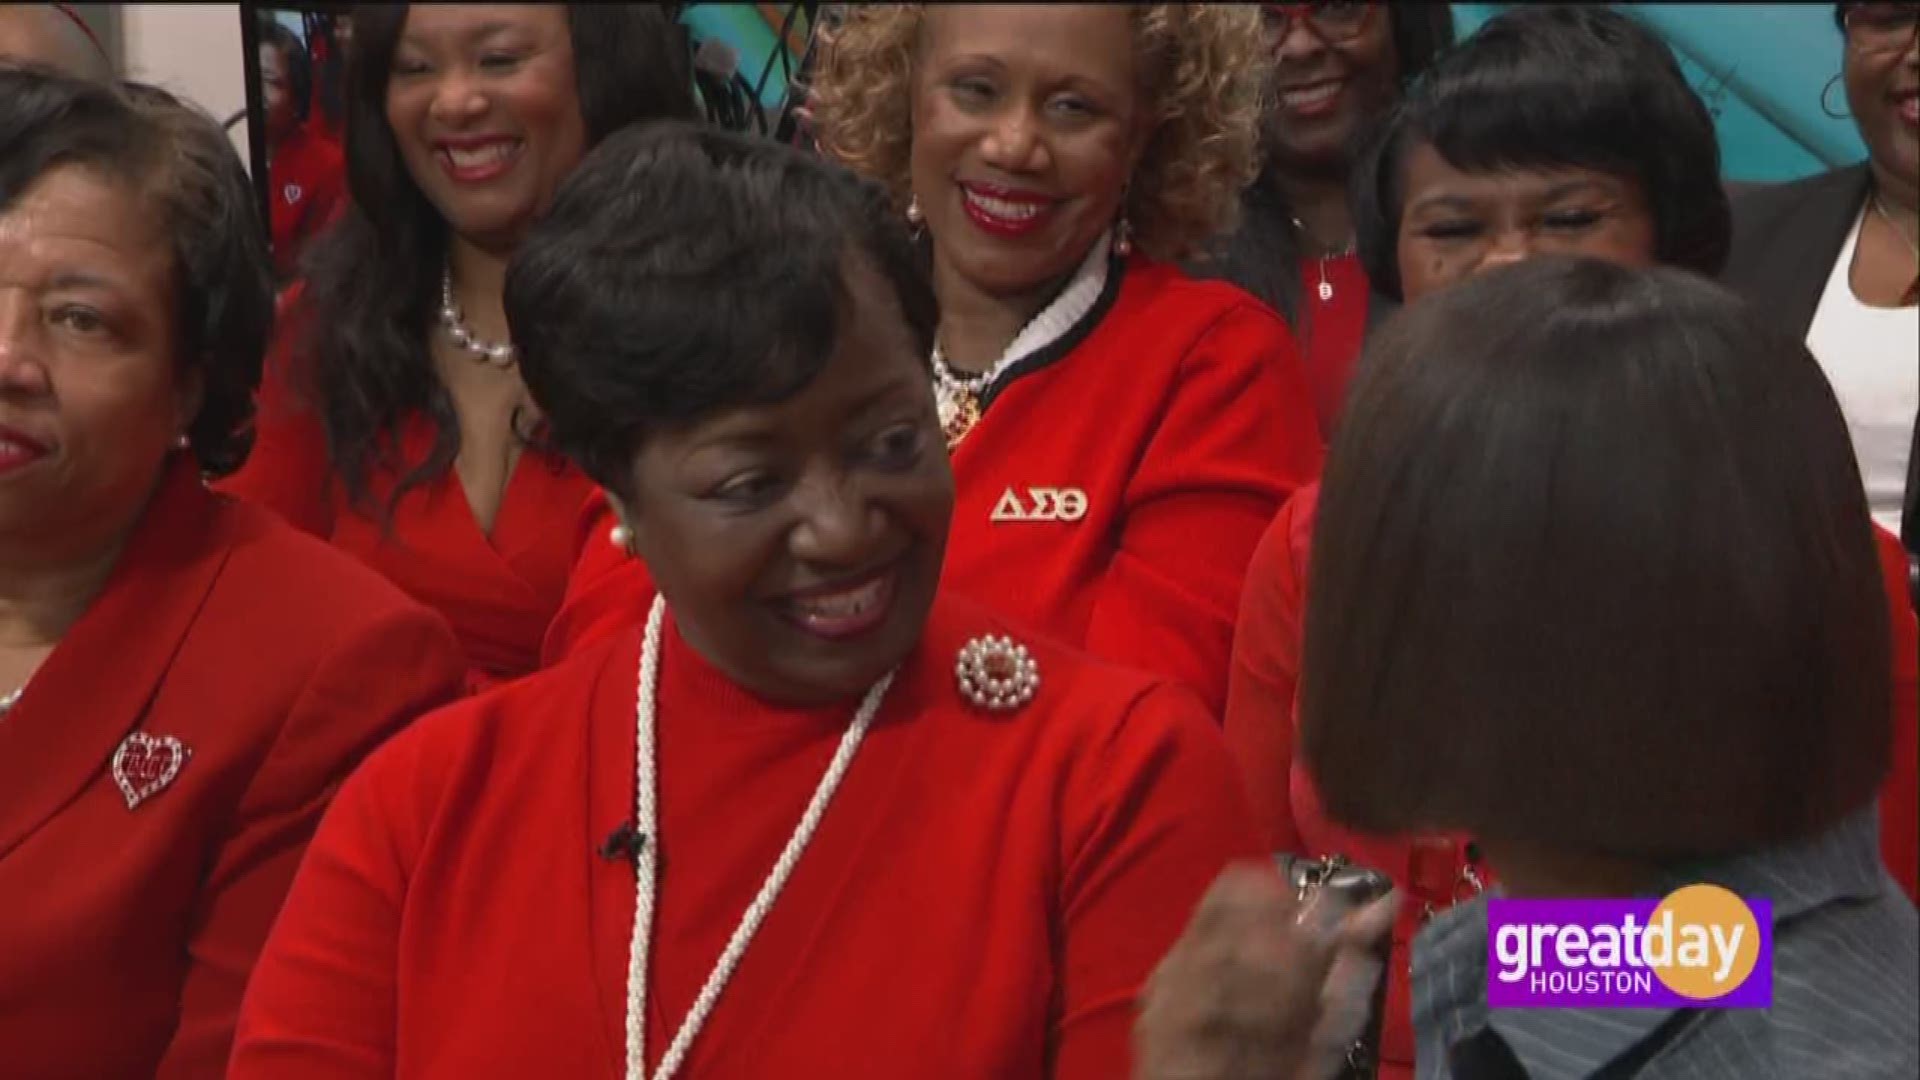 Jona Sargent, President of Houston Alumnae Chapter - Delta Sigma Theta, chats with Deborah Duncan about Joint Founder's Day in February 2020.